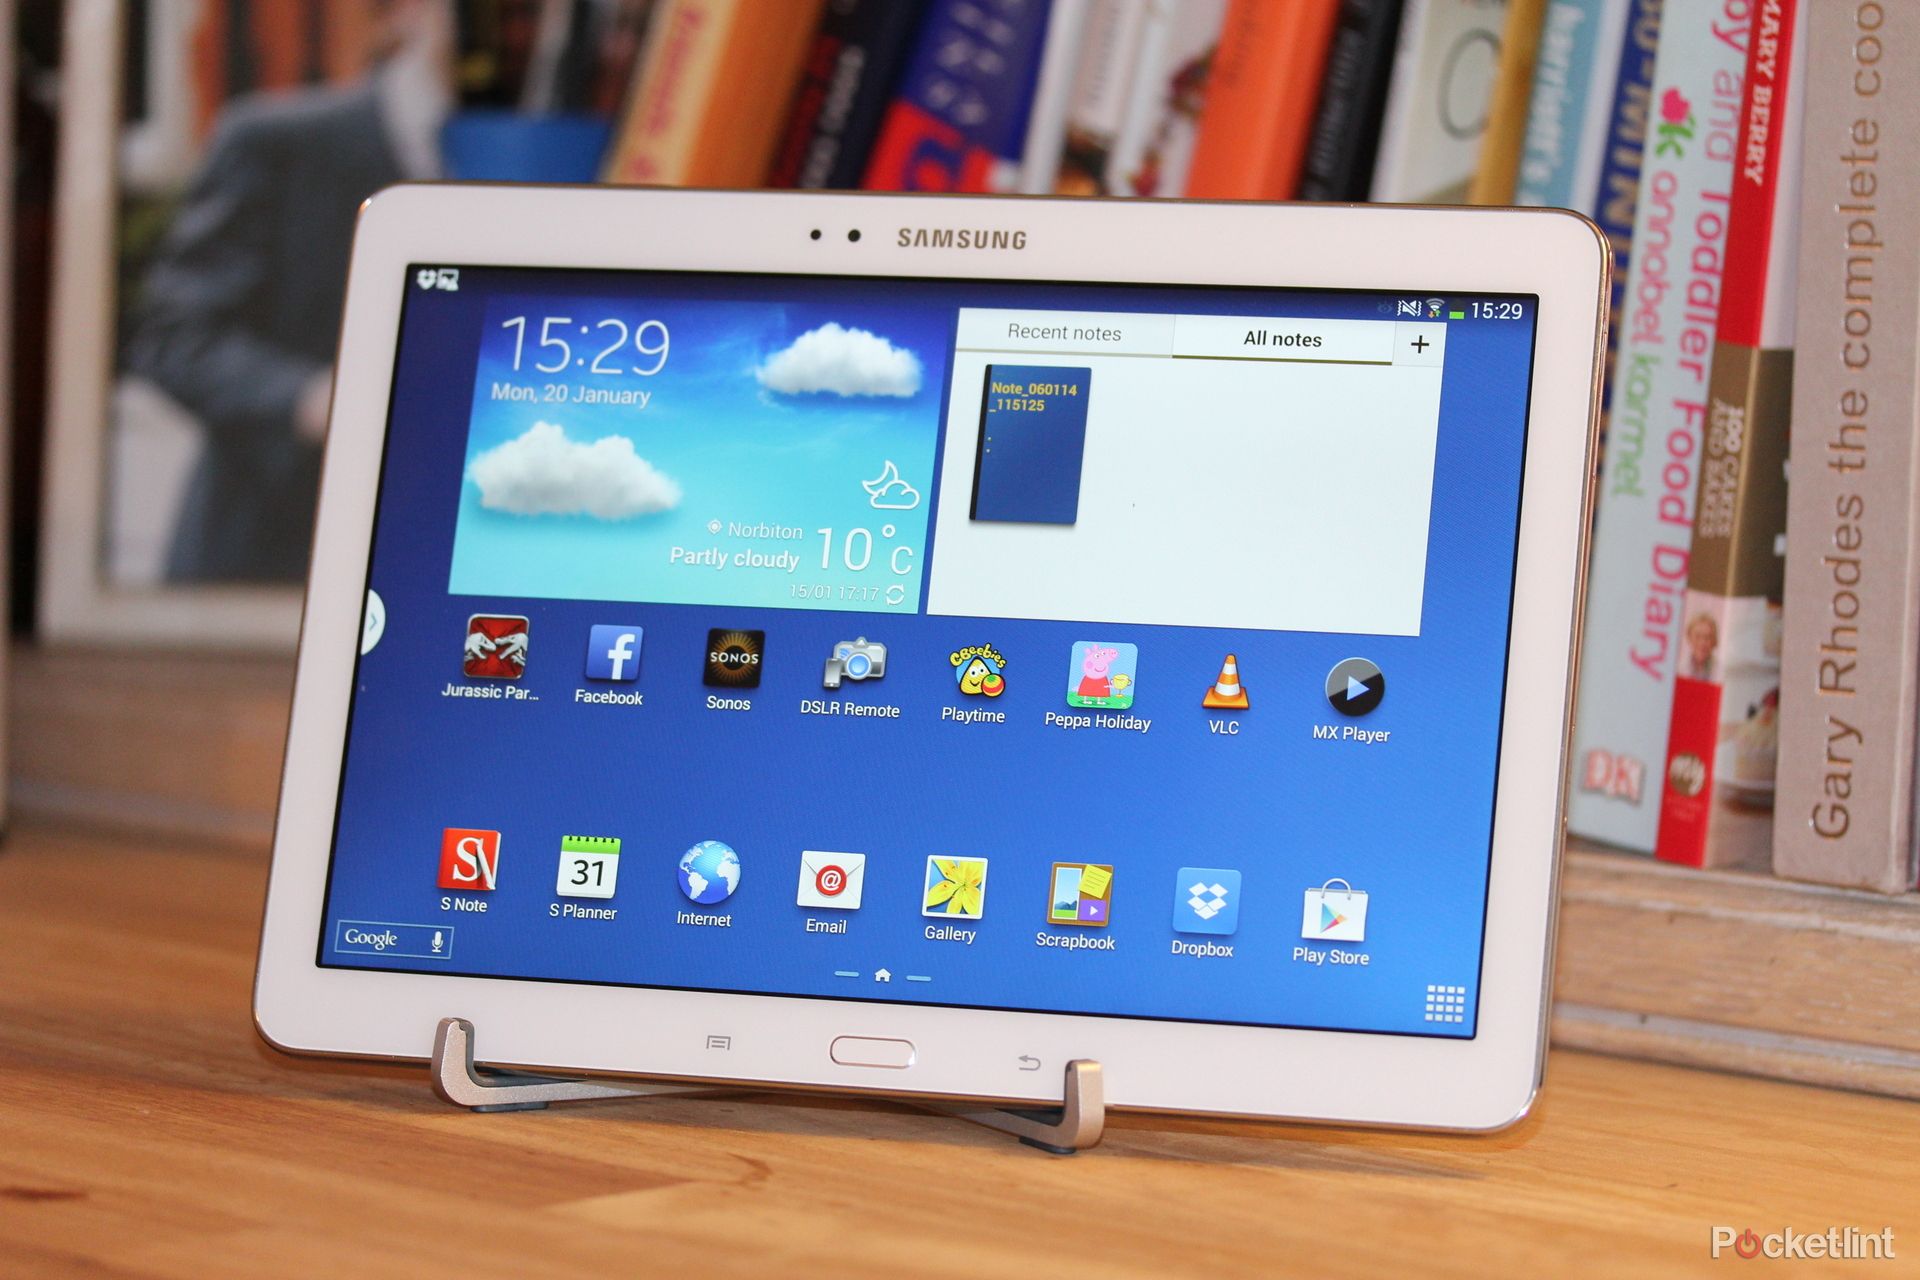 samsung galaxy note 10 1 review 2014 edition image 1